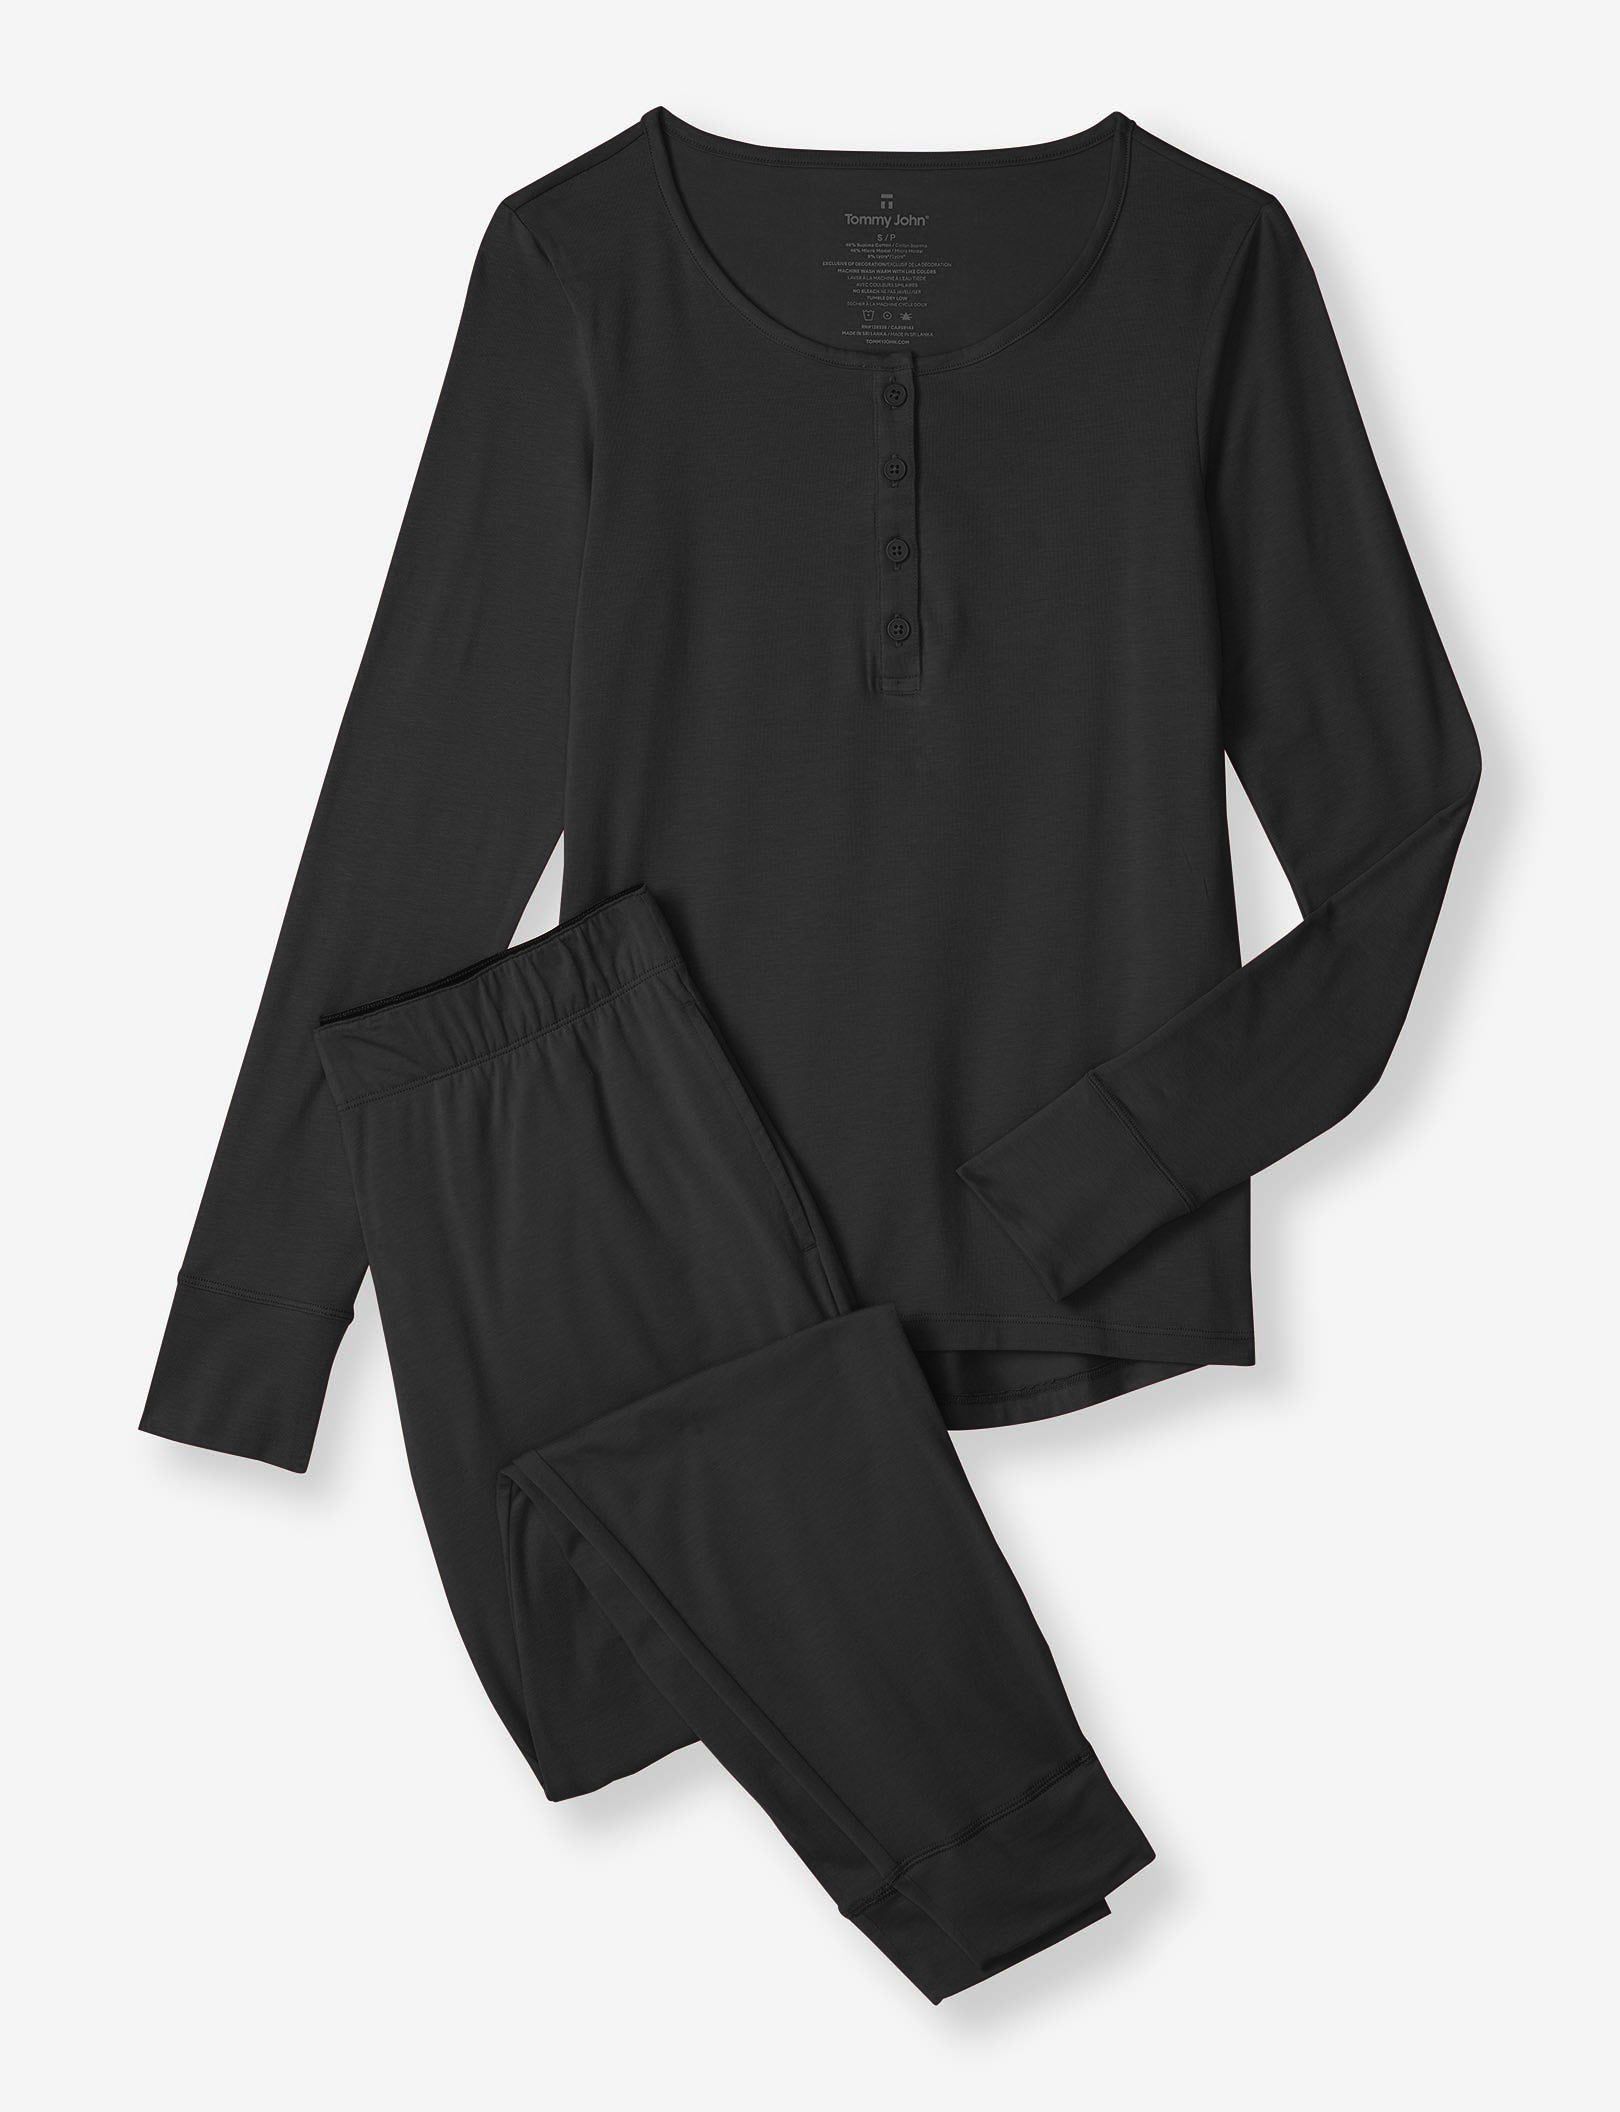 Women's Long Sleeve Top and Pant Essential Pajama Set | Tommy John